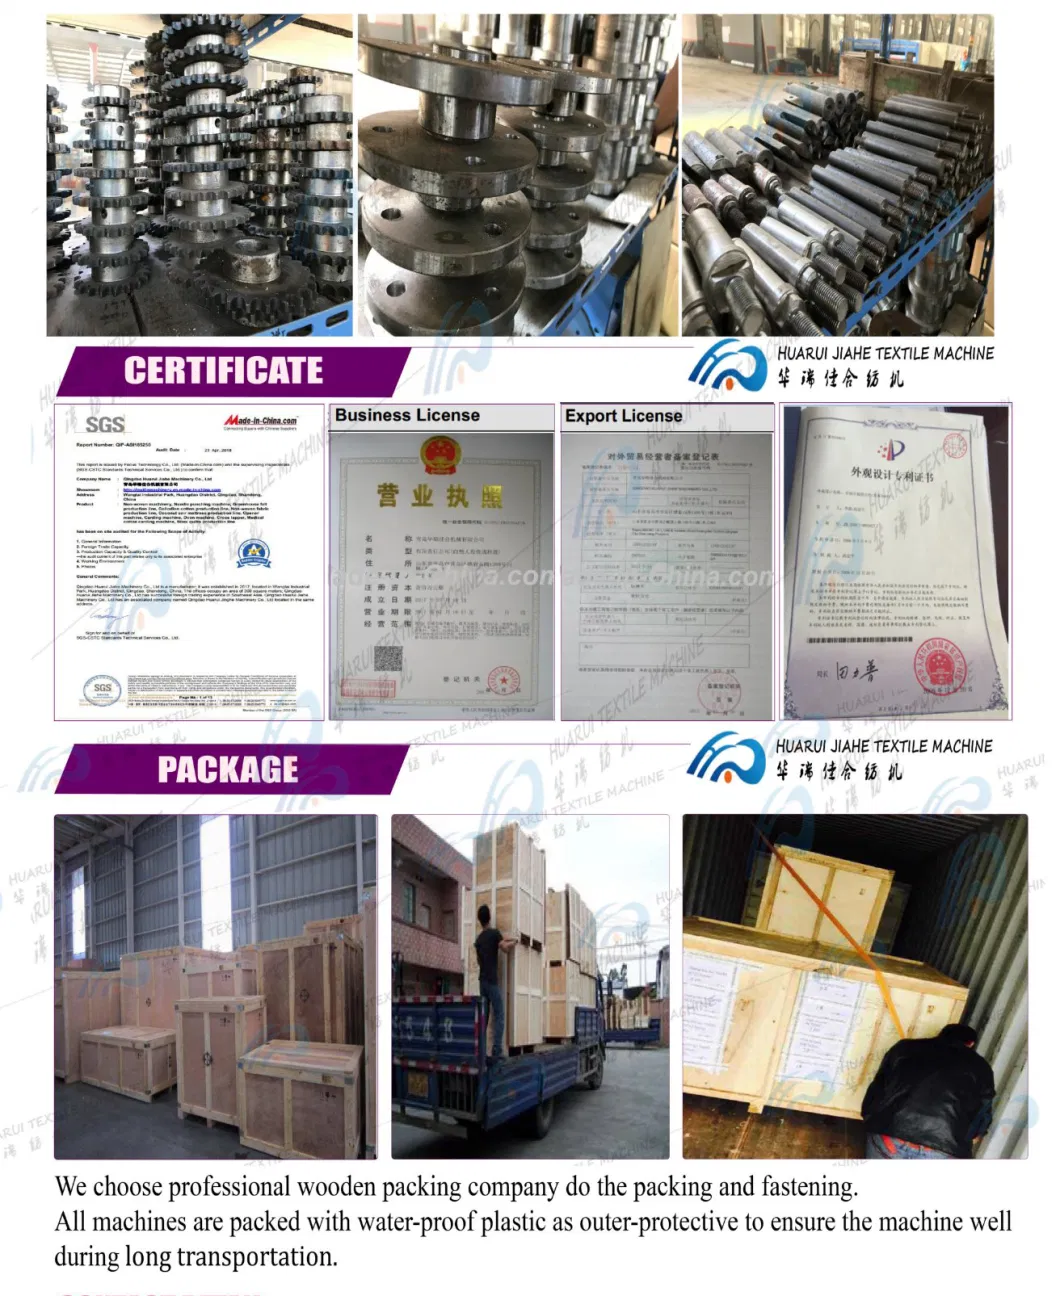 Two Barrel Hank to Cone Winding Machine, Cone / Hank Dyeing Machine Polypropylene Sample Synonyms with ISO9001 Certificates Loose Fiber Dyeing Machine